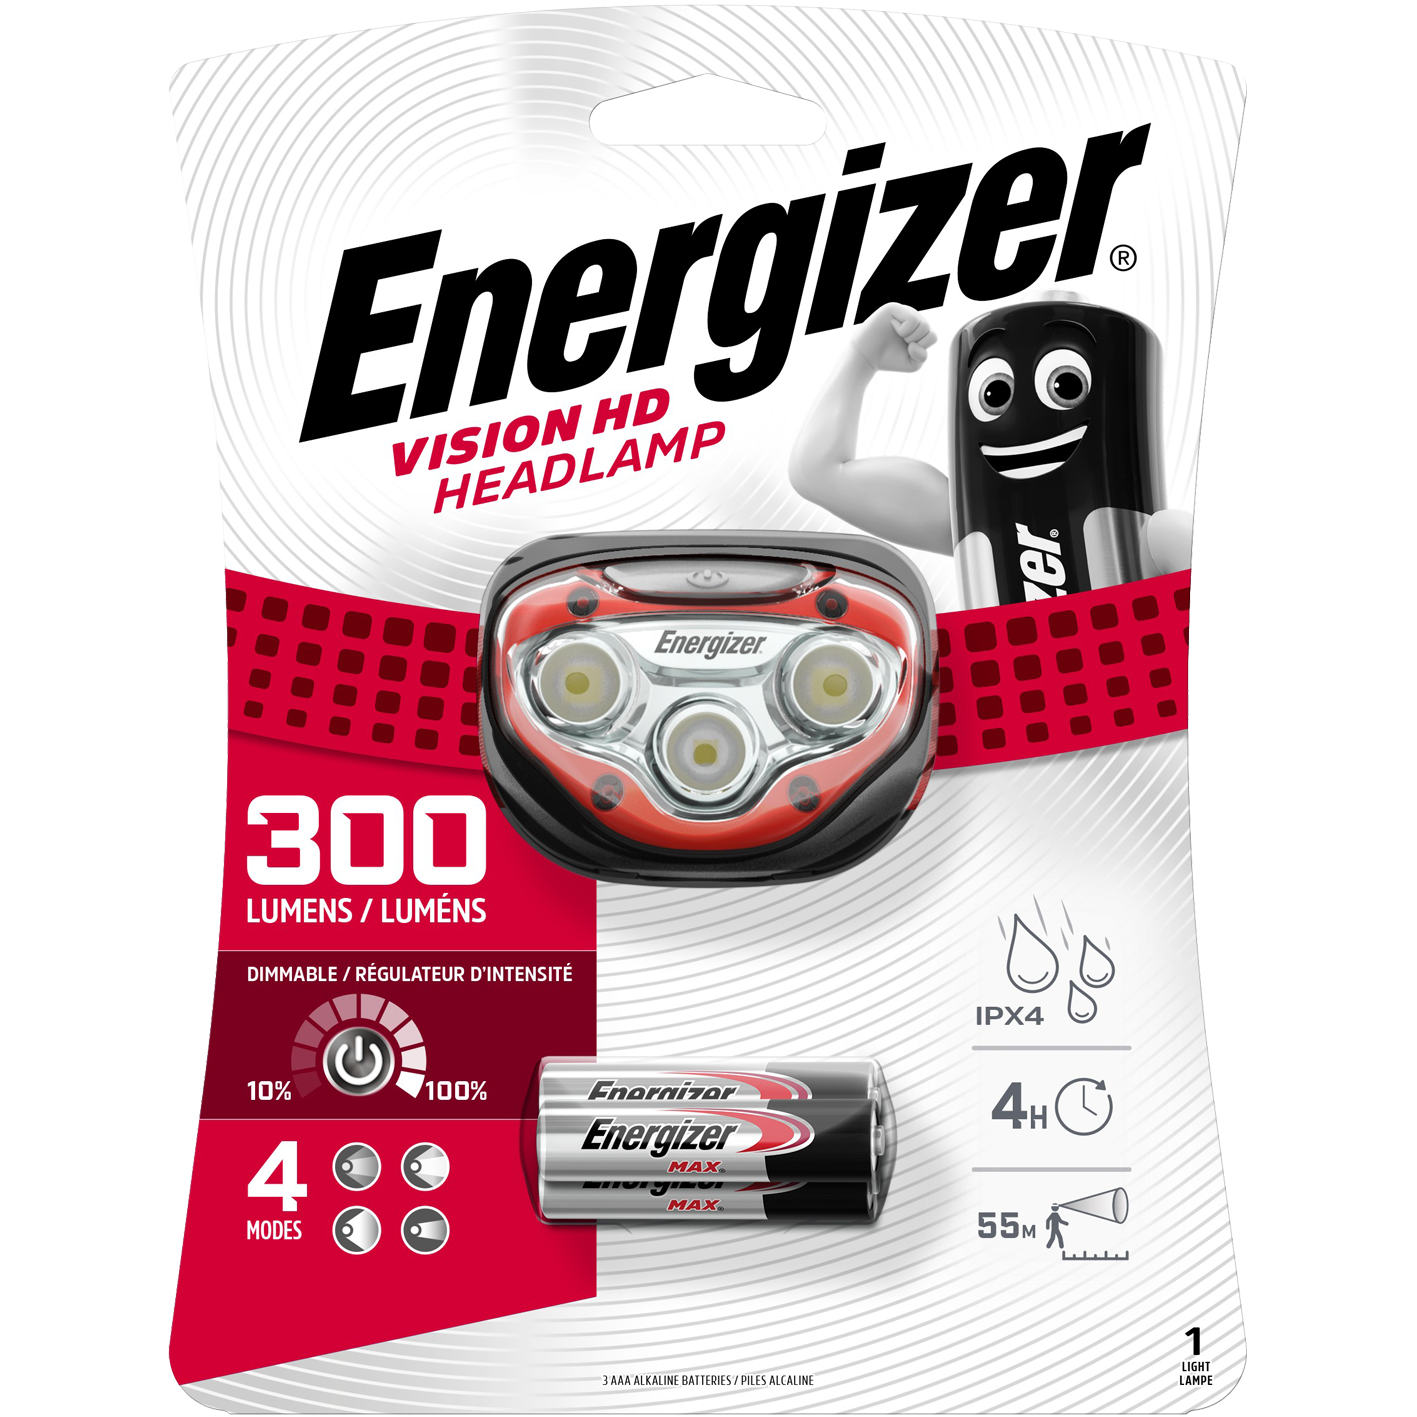 Energizer Vision HD 300 Lumens Headlight Torch With 3 x AAA Batteries